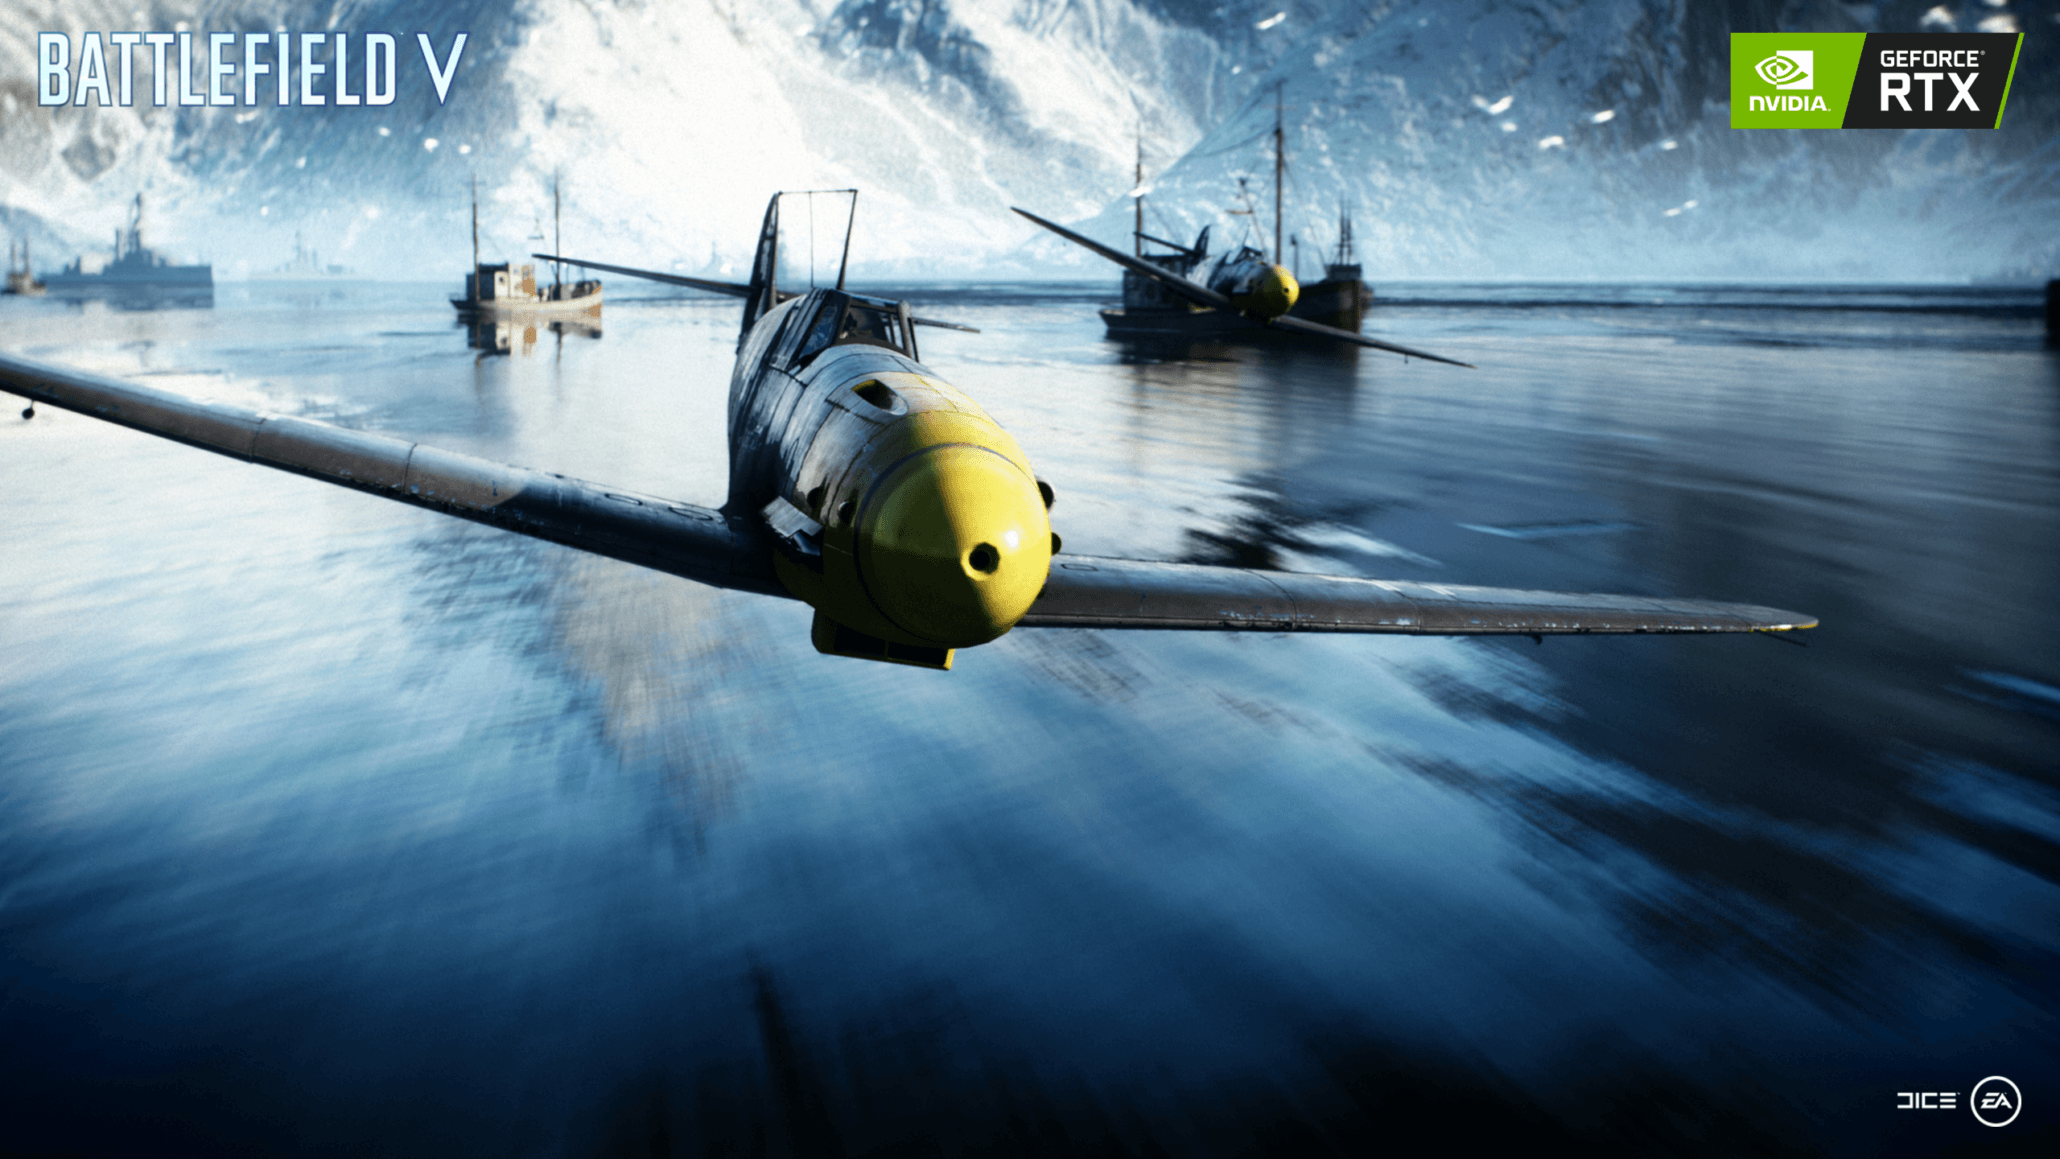 Ray Traced Battlefield V Currently Runs At Sub 30FPS In 4K, But DICE